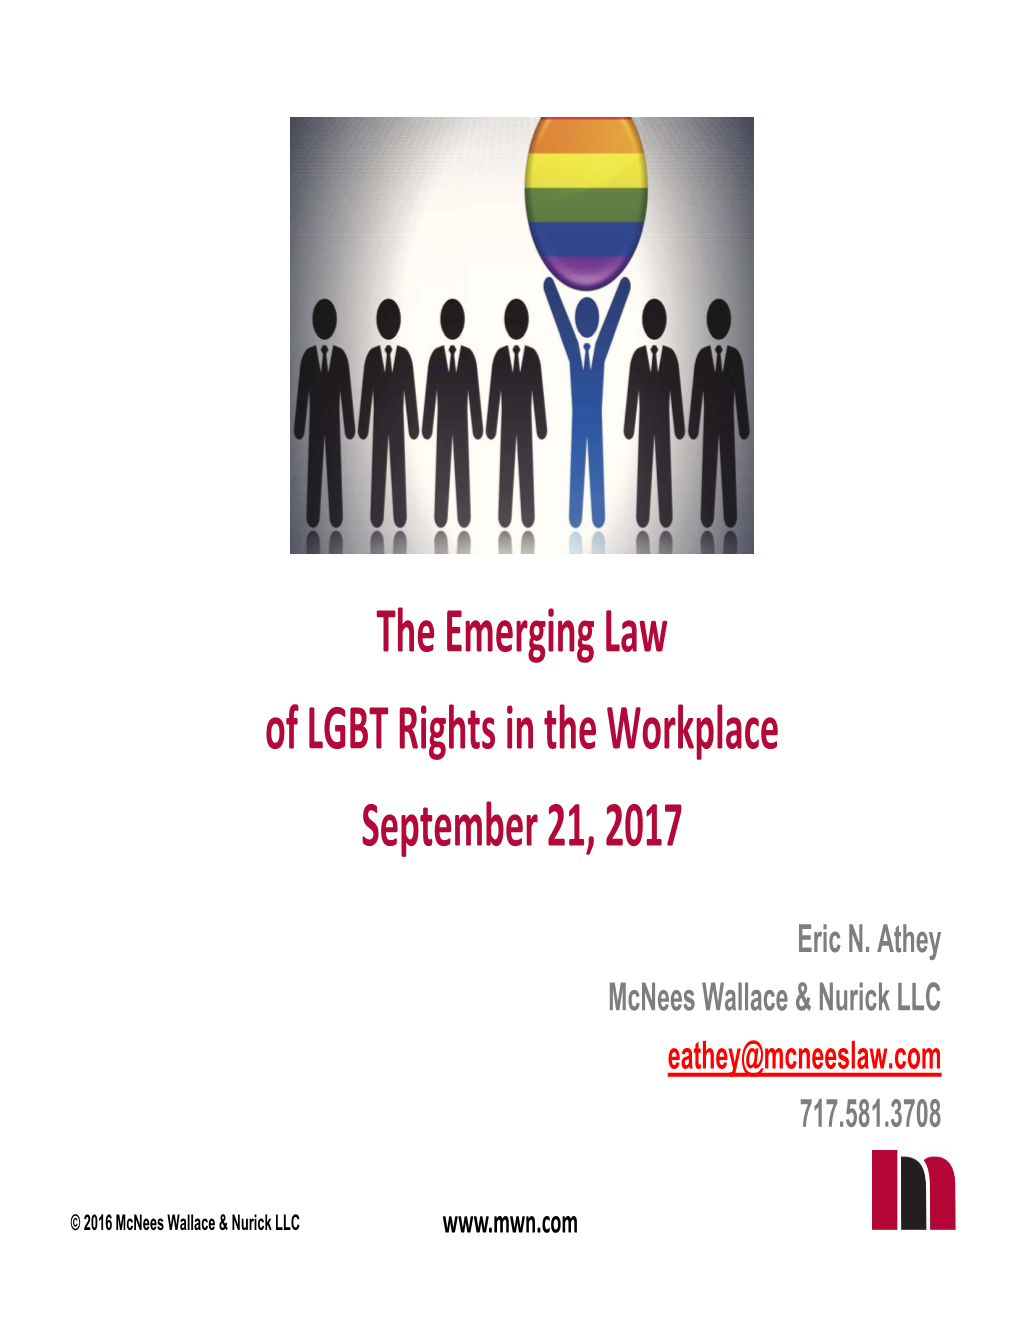 The Emerging Law of LGBT Rights in the Workplace September 21, 2017